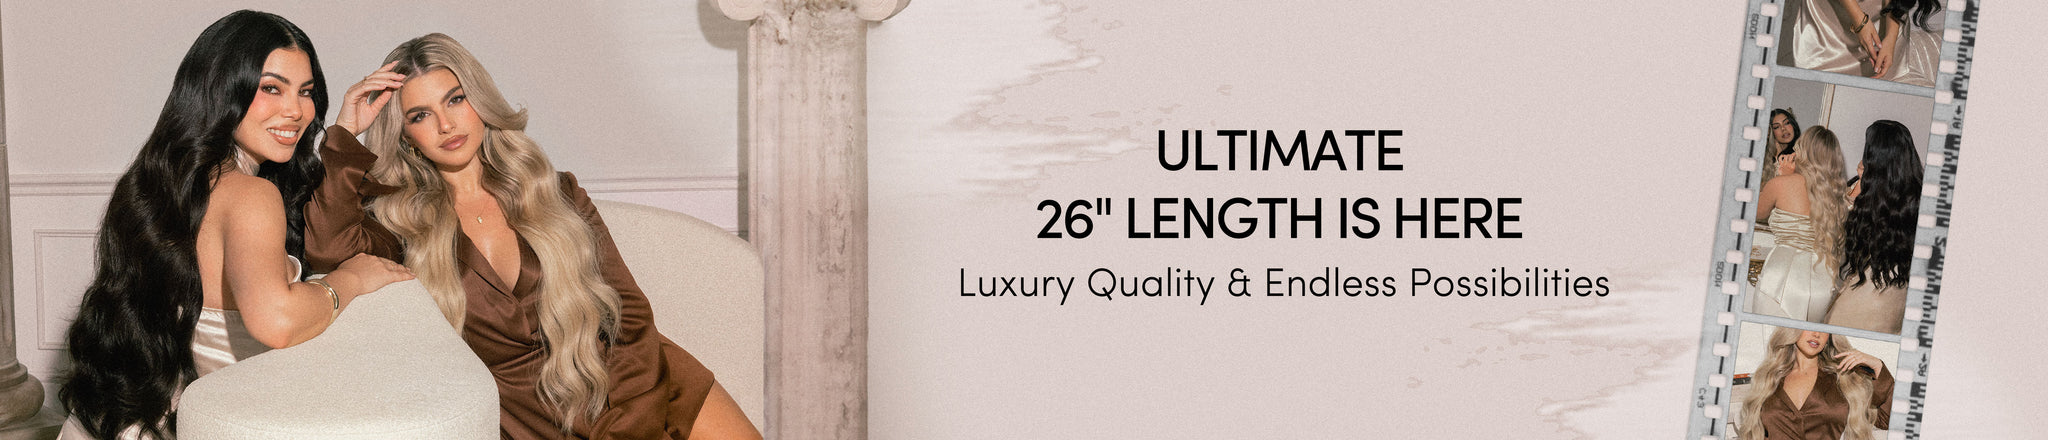 Ultimate 26" length is here | Luxury Quality & Endless Possibilities